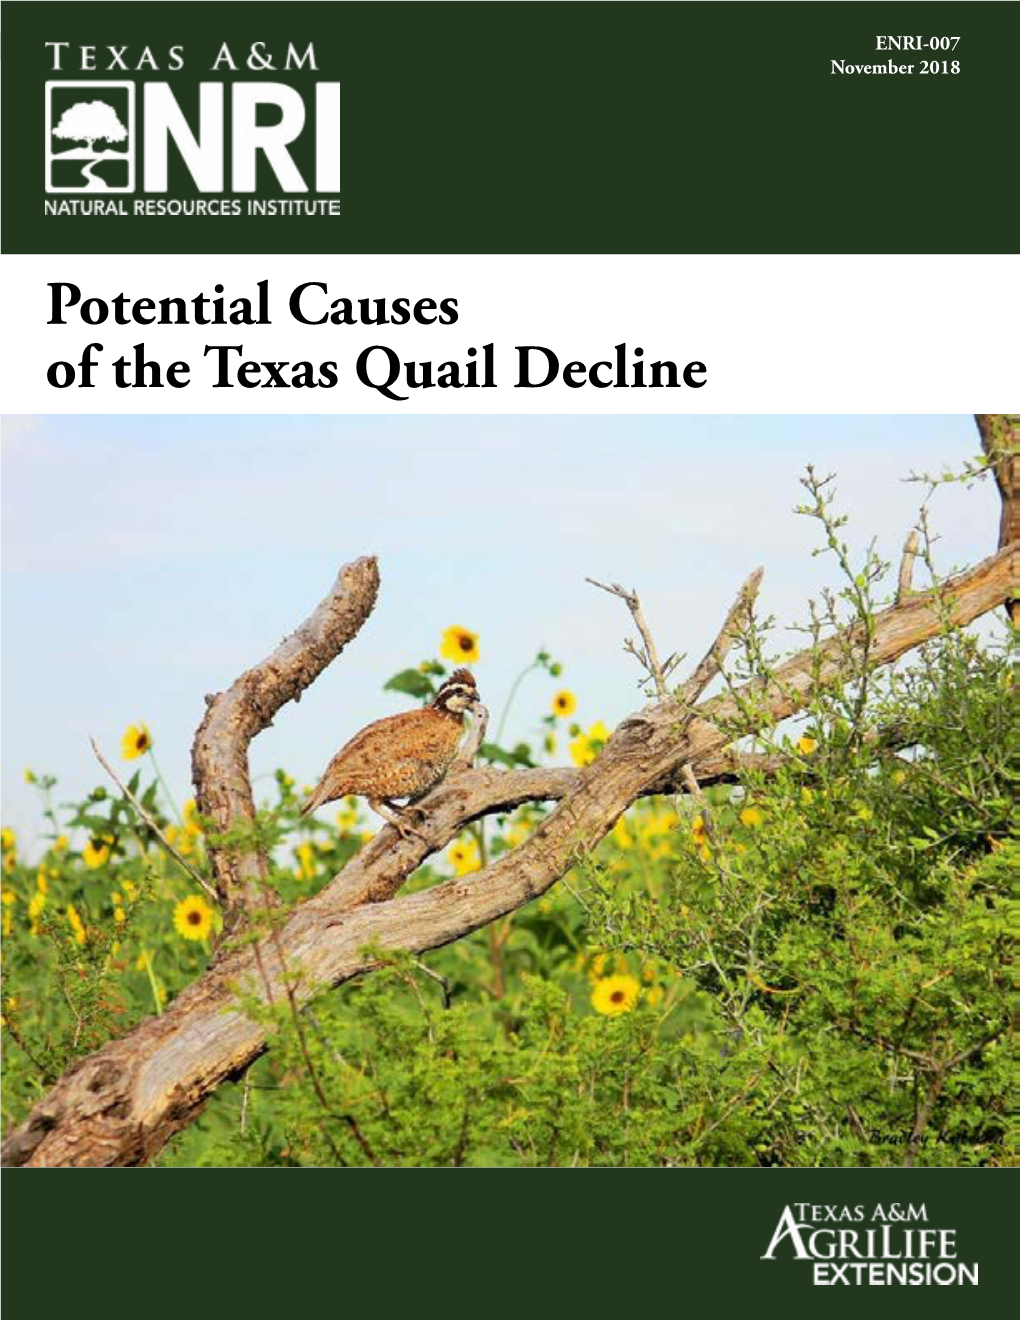 Potential Causes of the Texas Quail Decline